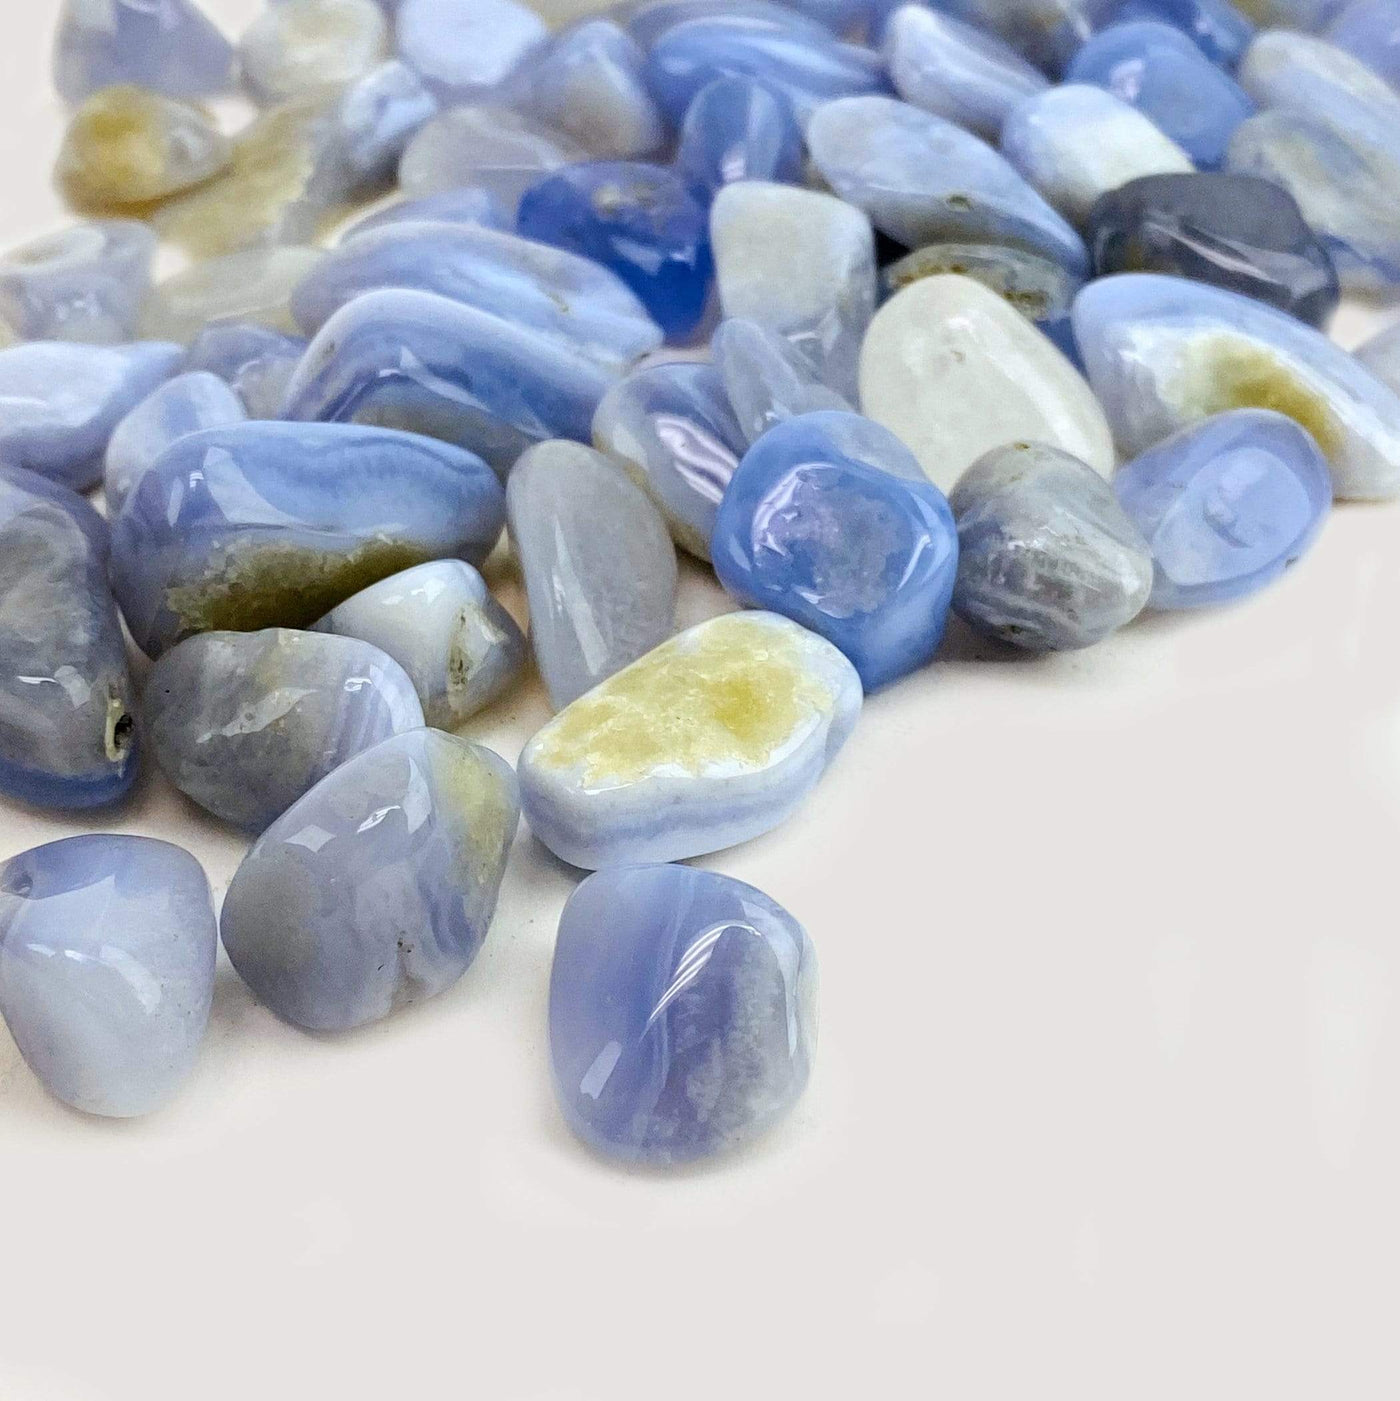 Blue Lace Agate Small Tumbled Stones spread out from a side view showing another angle